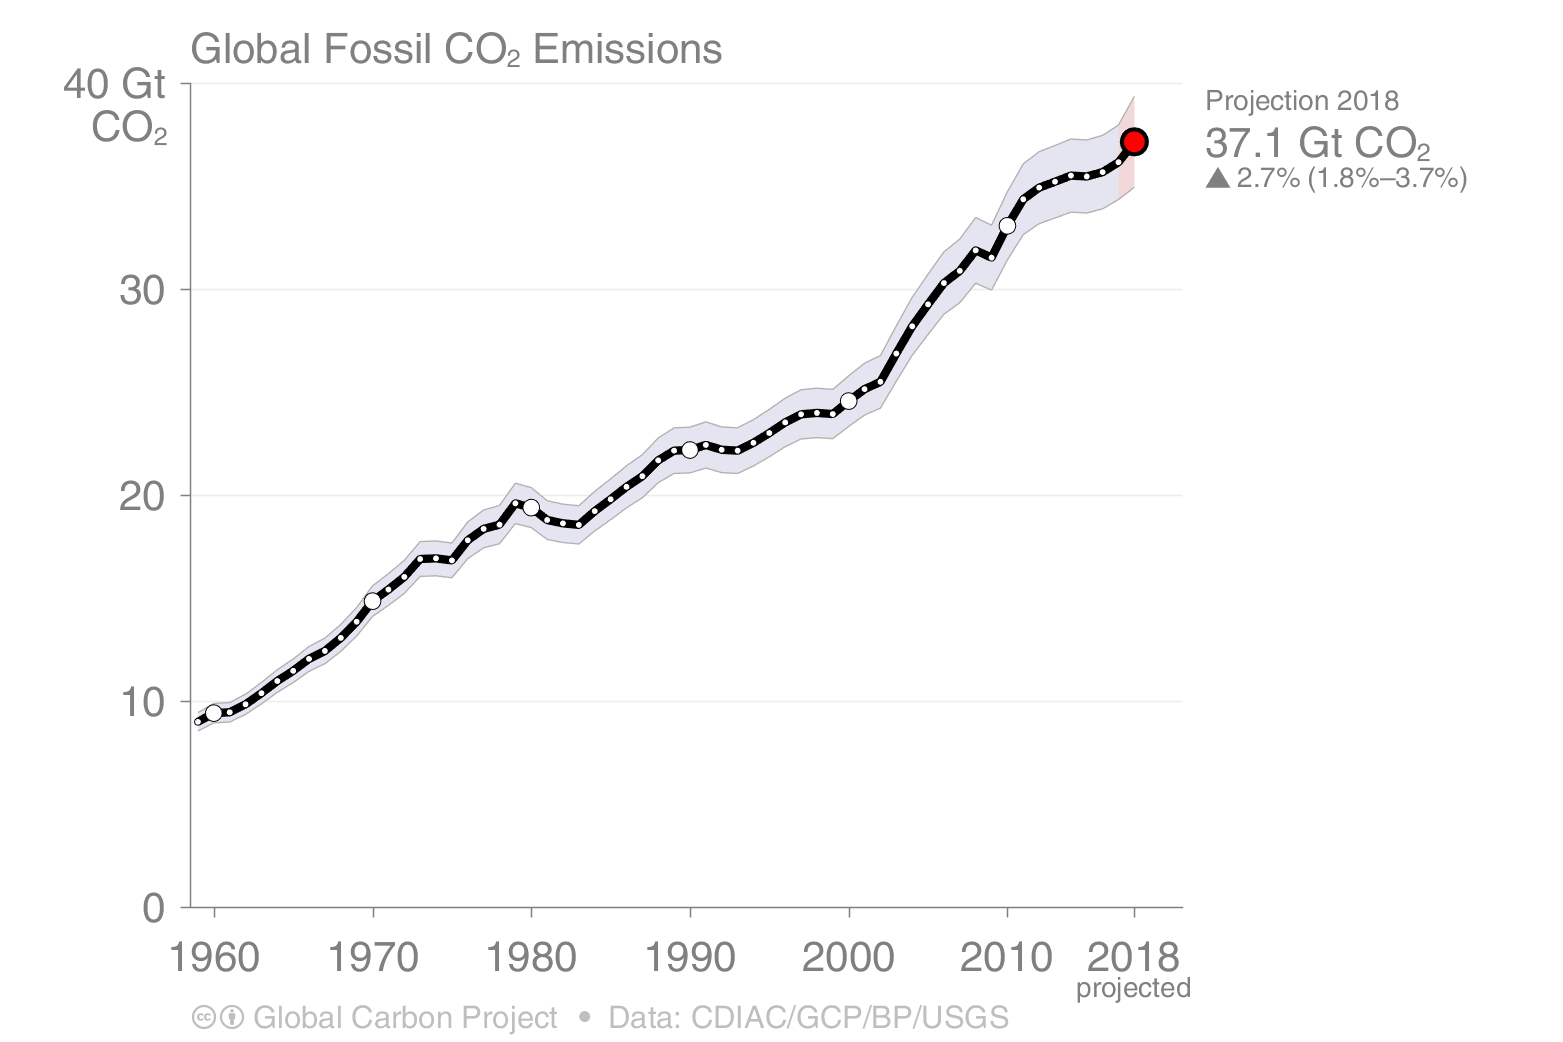 Global Fossil CO2 and cement emissions from 1960 on